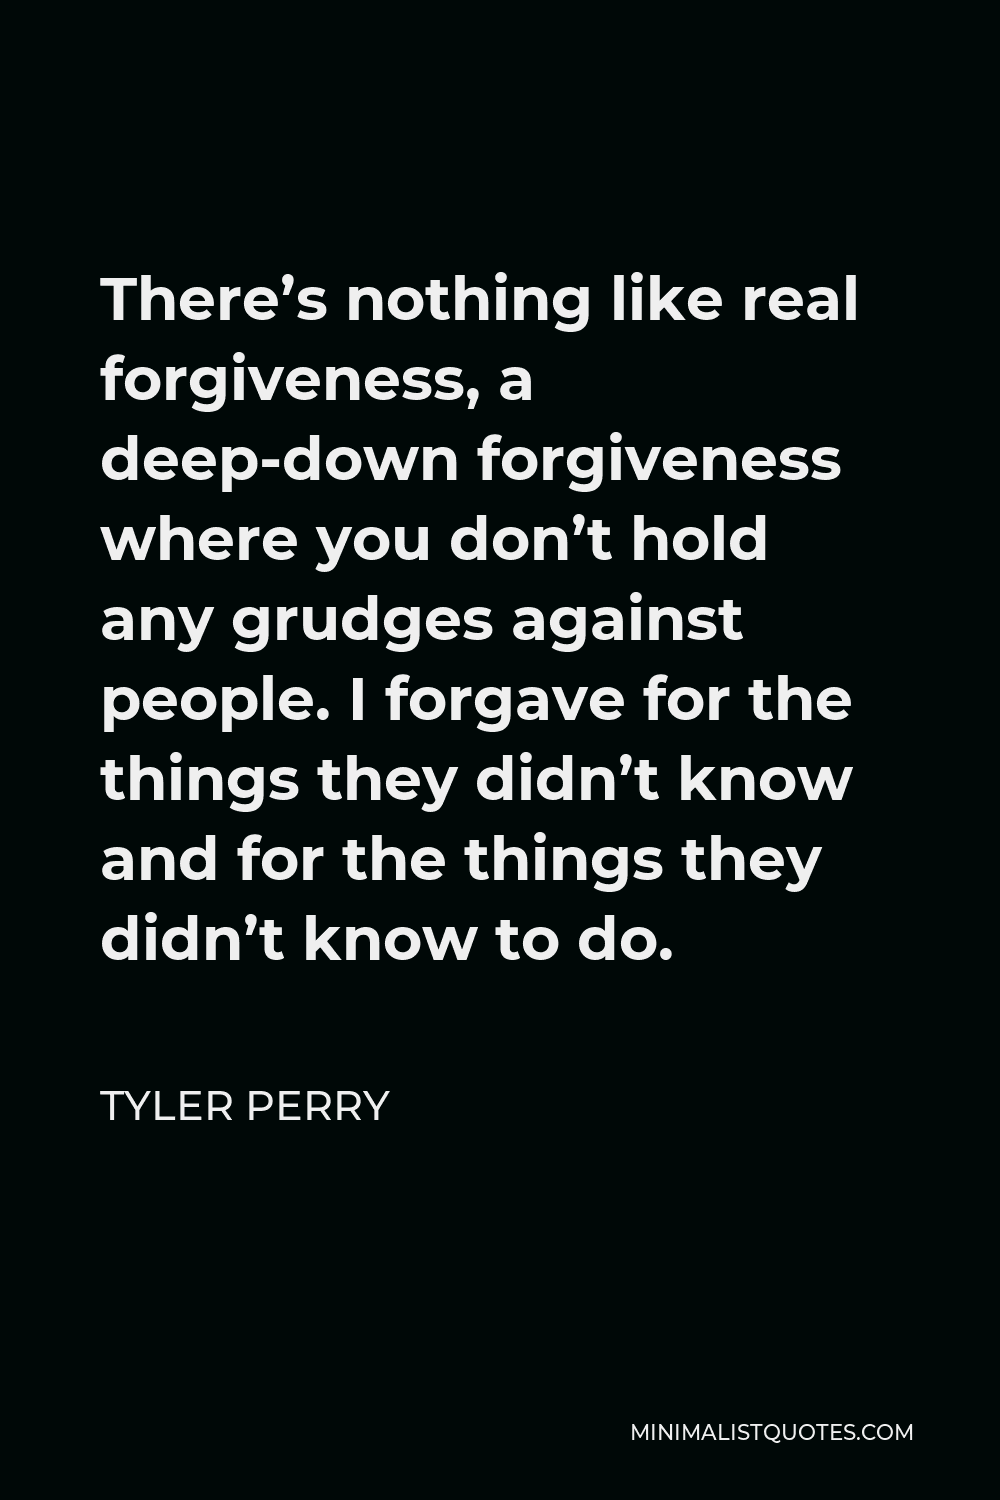 Tyler Perry Quote: There's nothing like real forgiveness, a deep-down  forgiveness where you don't hold any grudges against people. I forgave for  the things they didn't know and for the things they